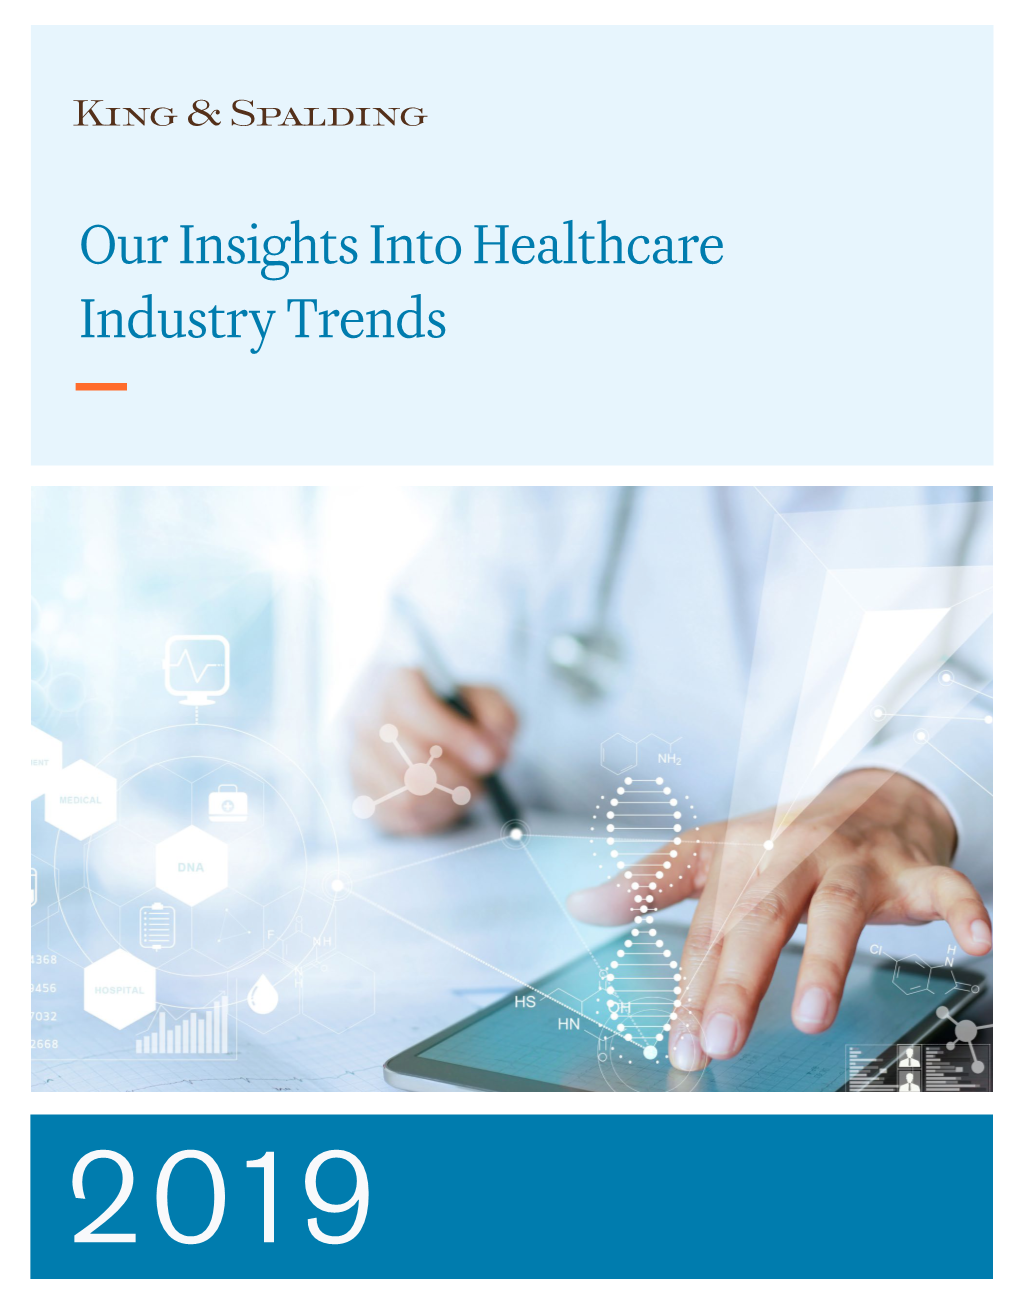 Our Insights Into Healthcare Industry Trends